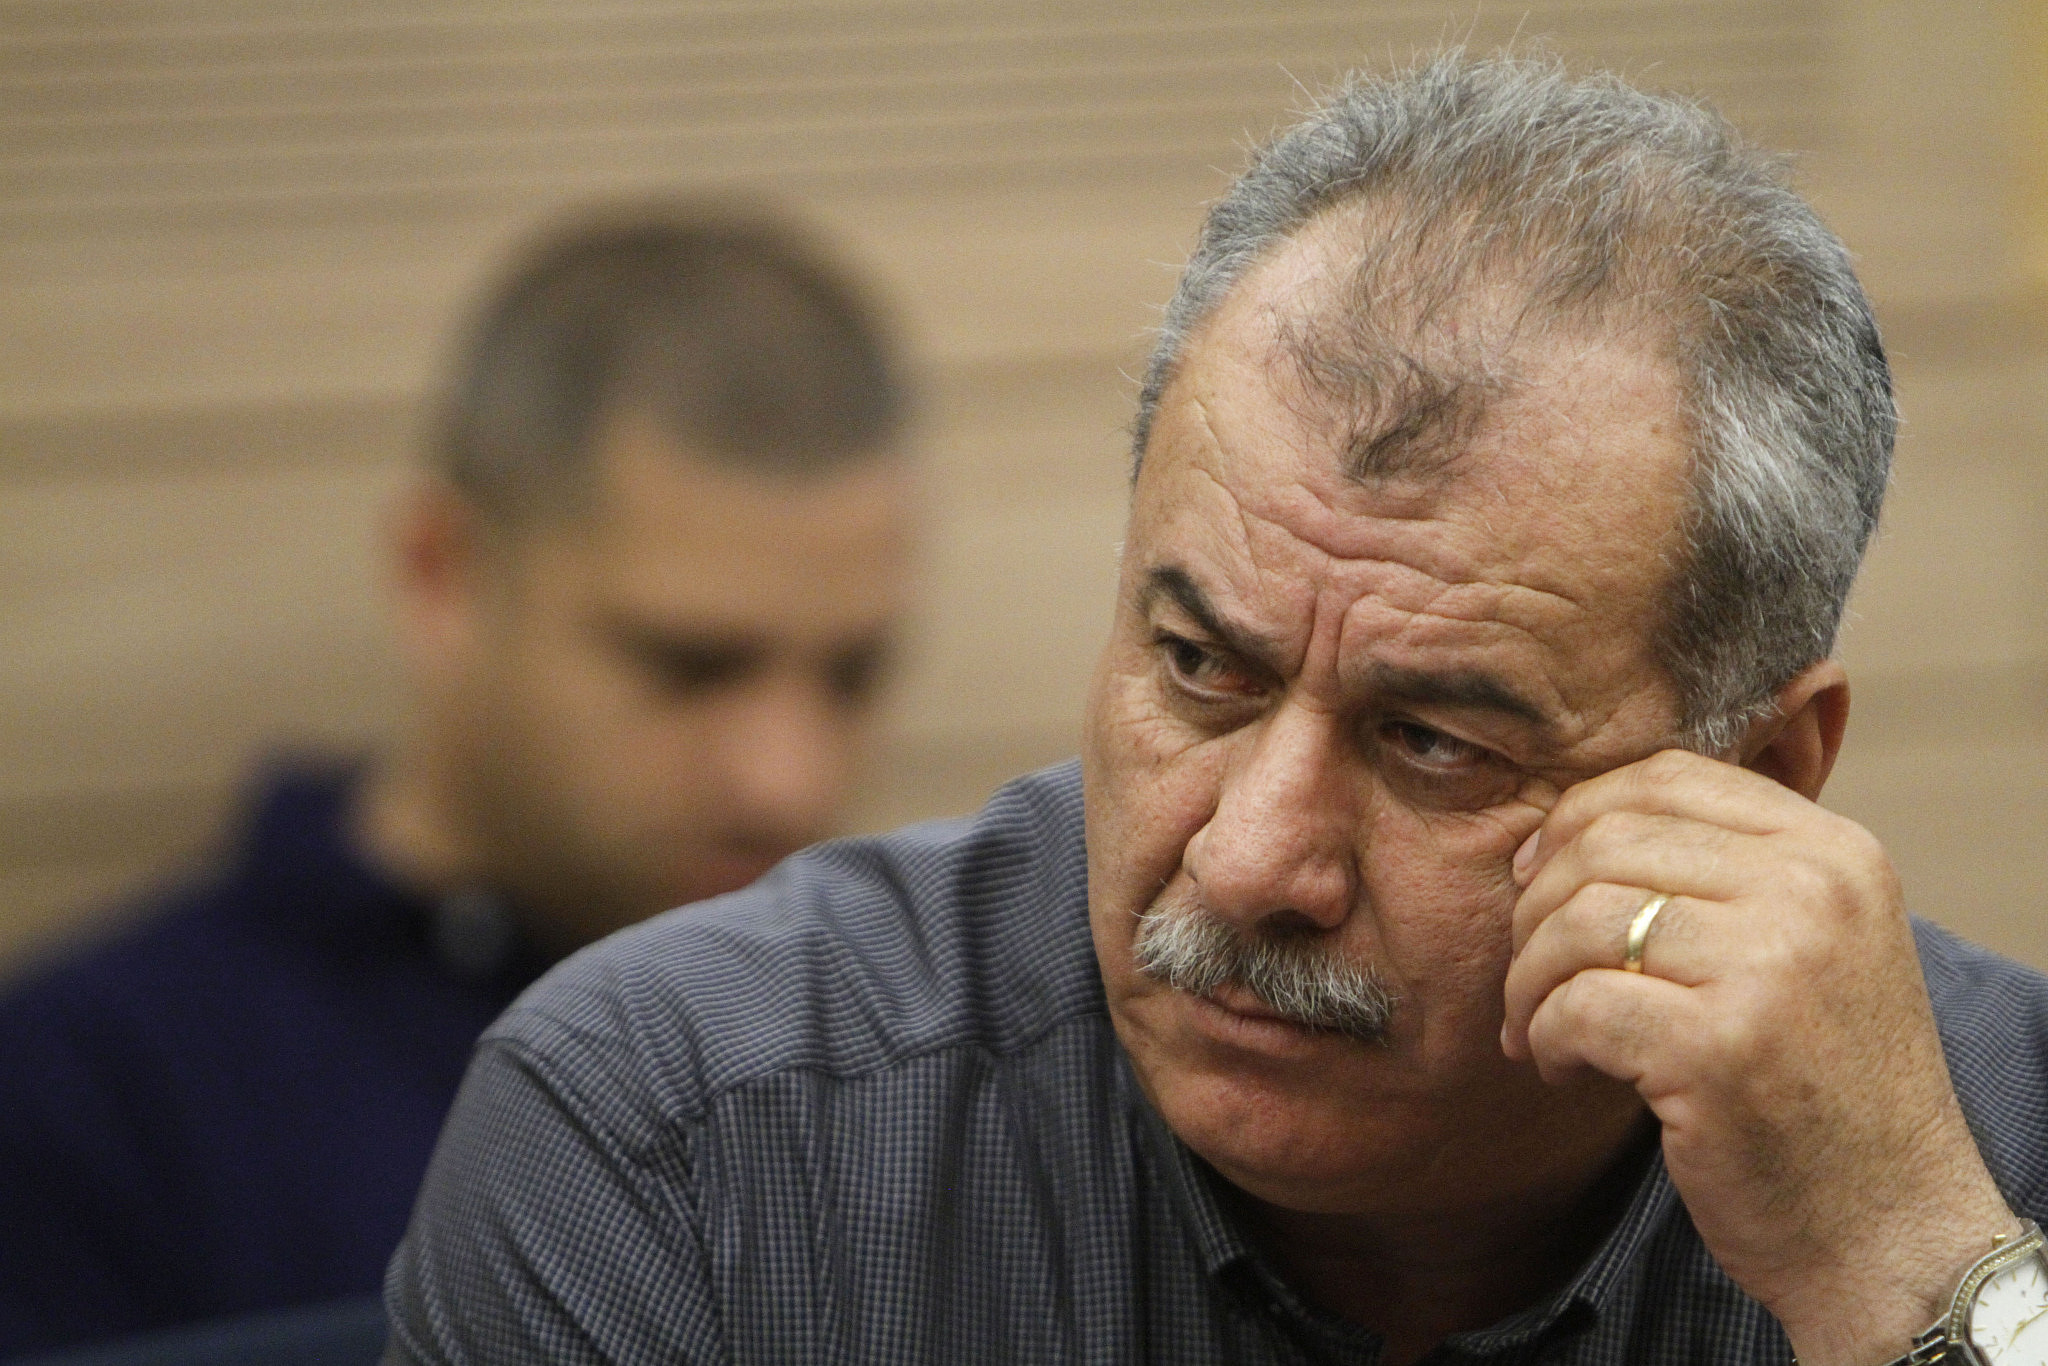 Mohammad Barakeh, head of the High Follow-Up Committee, at the Knesset on May 14, 2012. (Miriam Alster/Flash90)